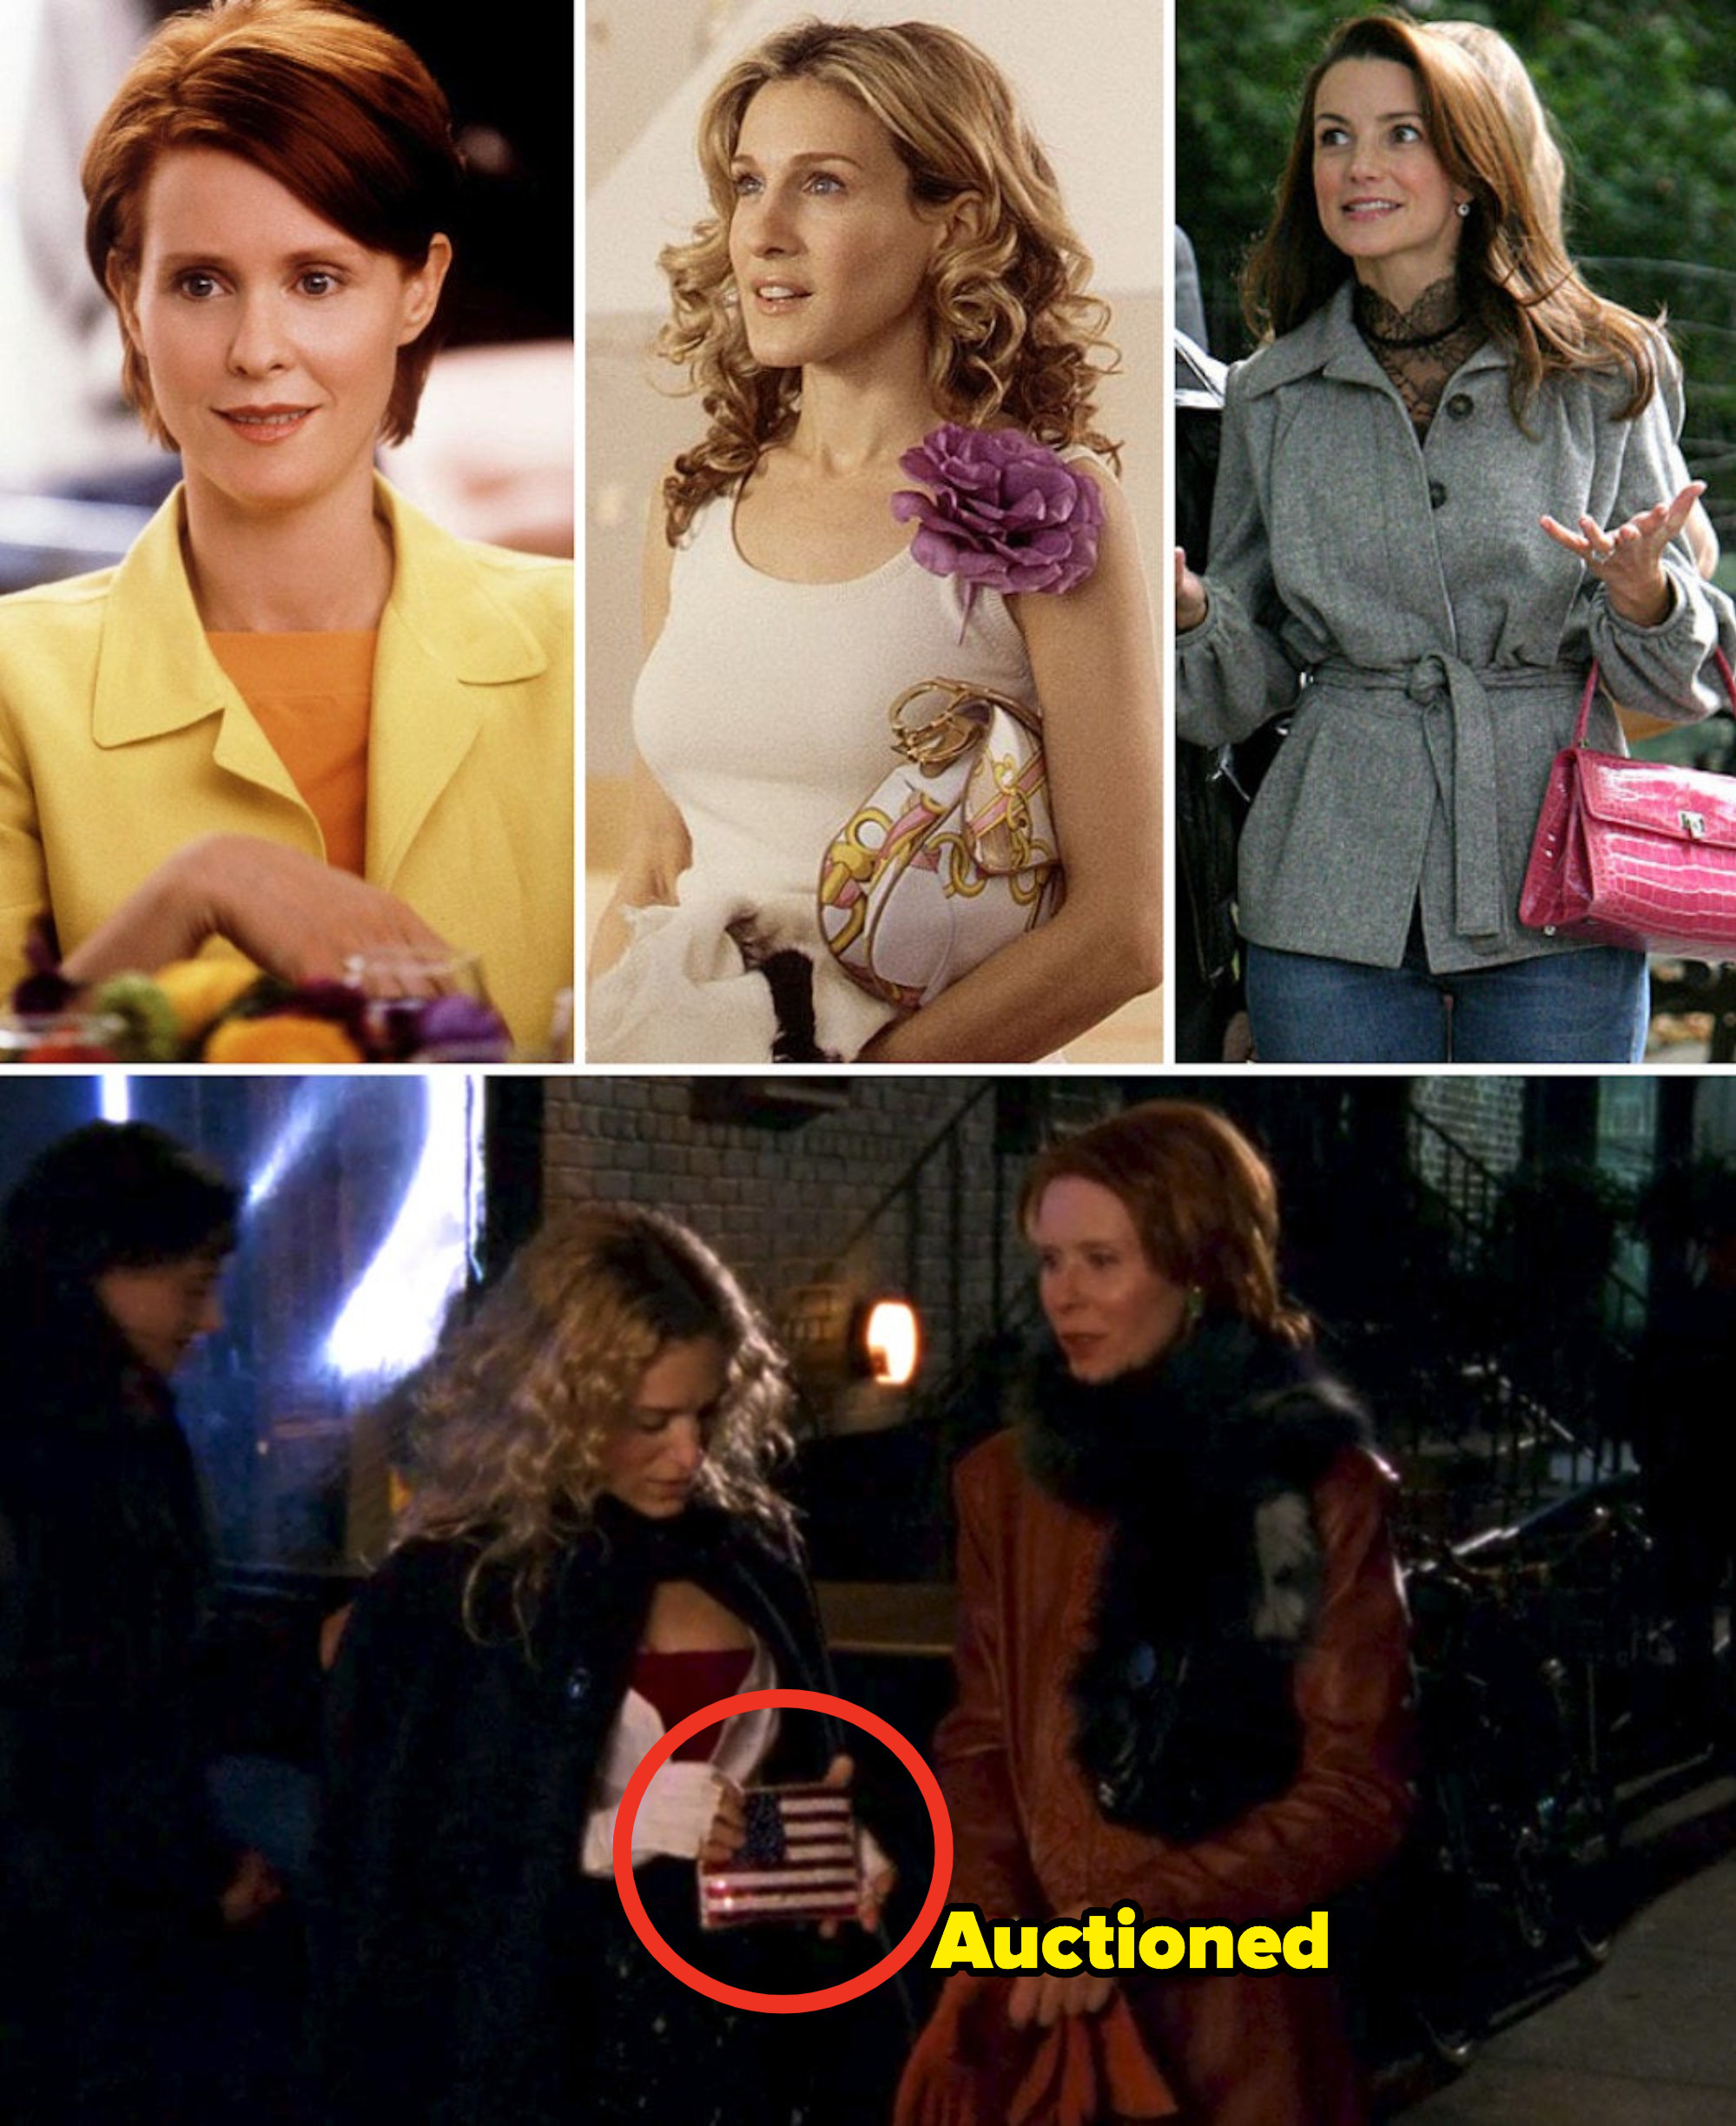 Cynthia Nixon wearing a blazer with a shirt; Sarah Jessica Parker wearing a tank top with a funky bag and bright-colored flower; Kristin Davis wearing a winter coat and bright-colored leather bag; Carrie holding her sequined American flag bag